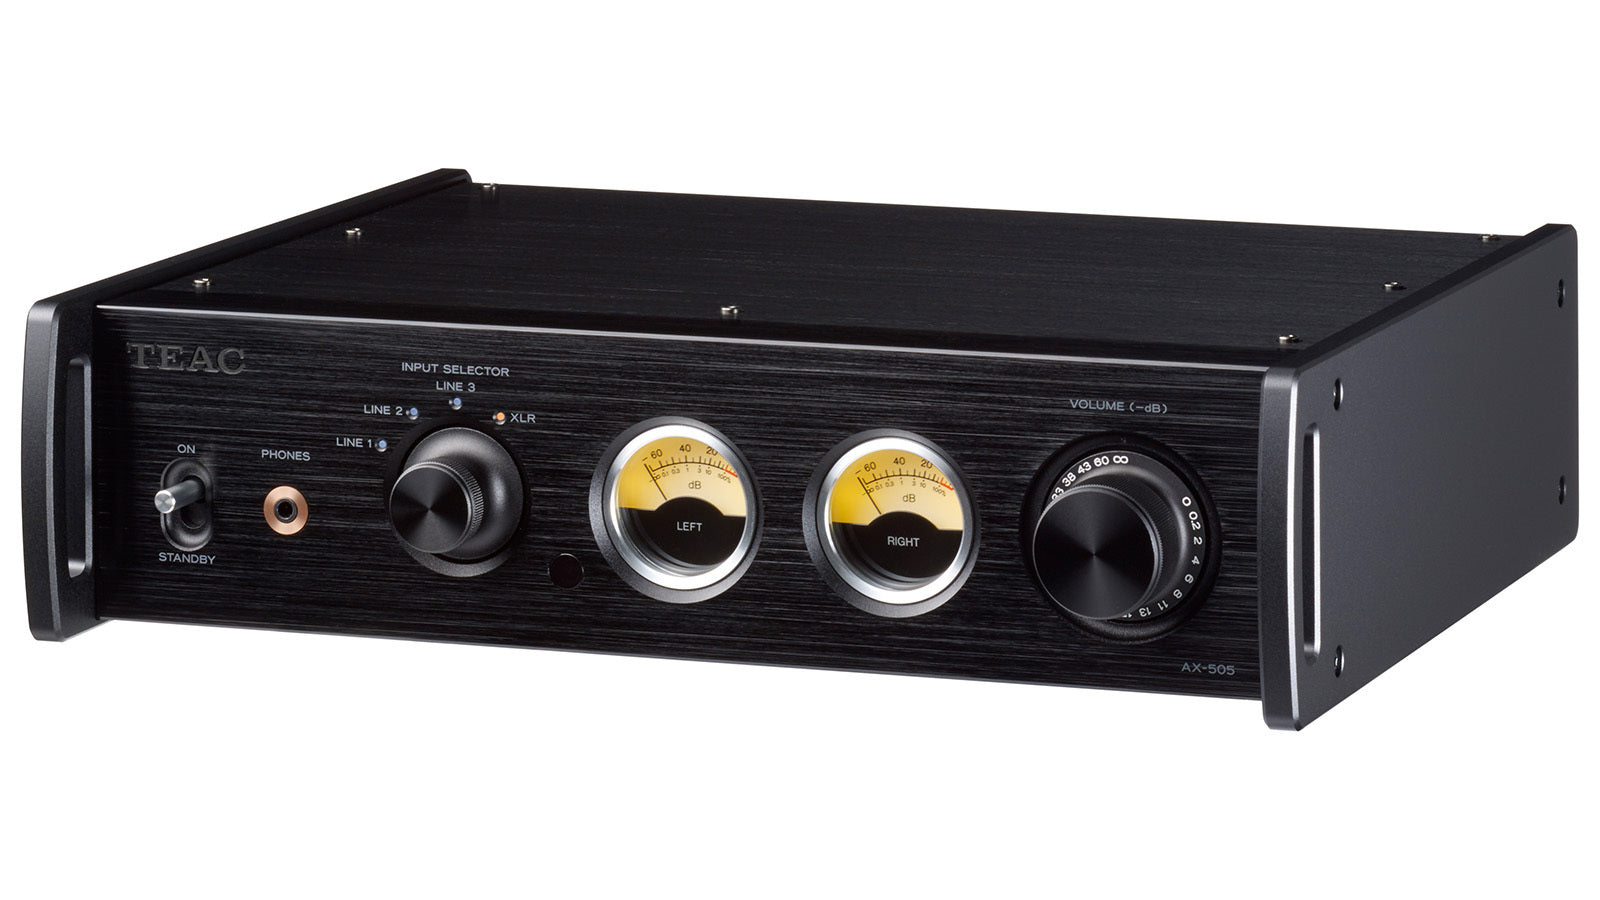 Teac AX-505 integrated stereo amplifier